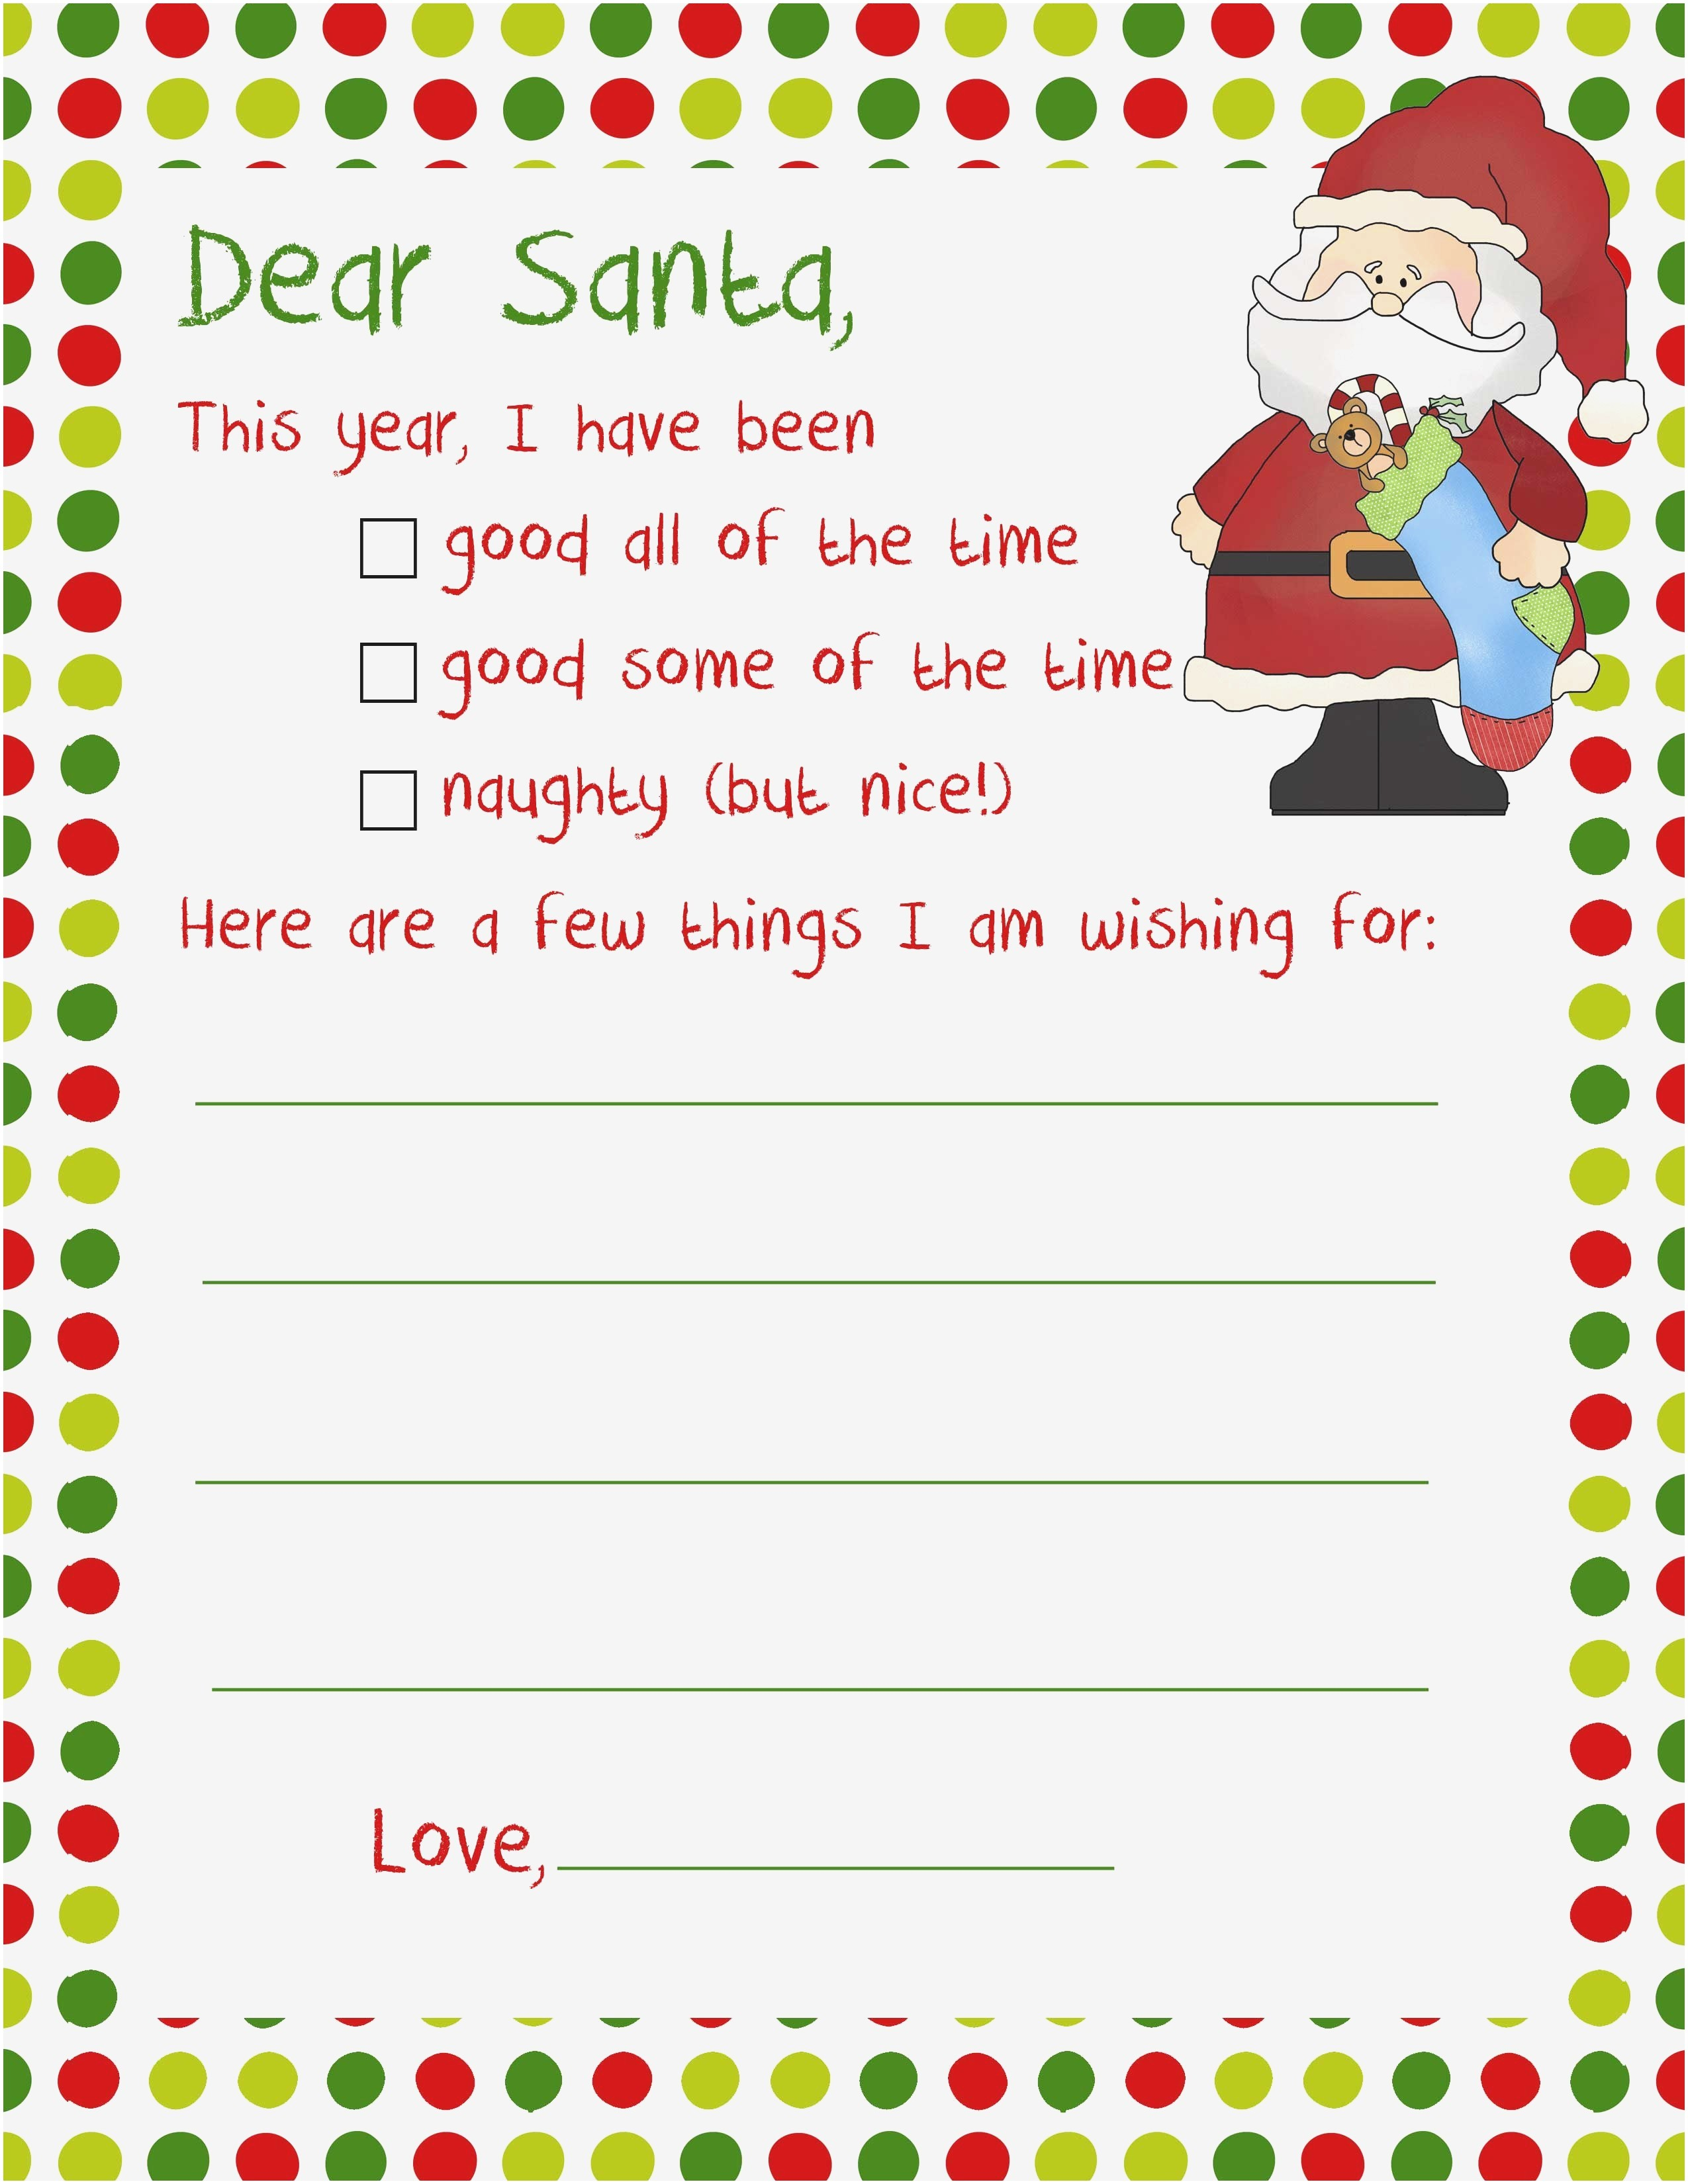 example-of-letter-from-santa-letter-from-santa-template-ideas